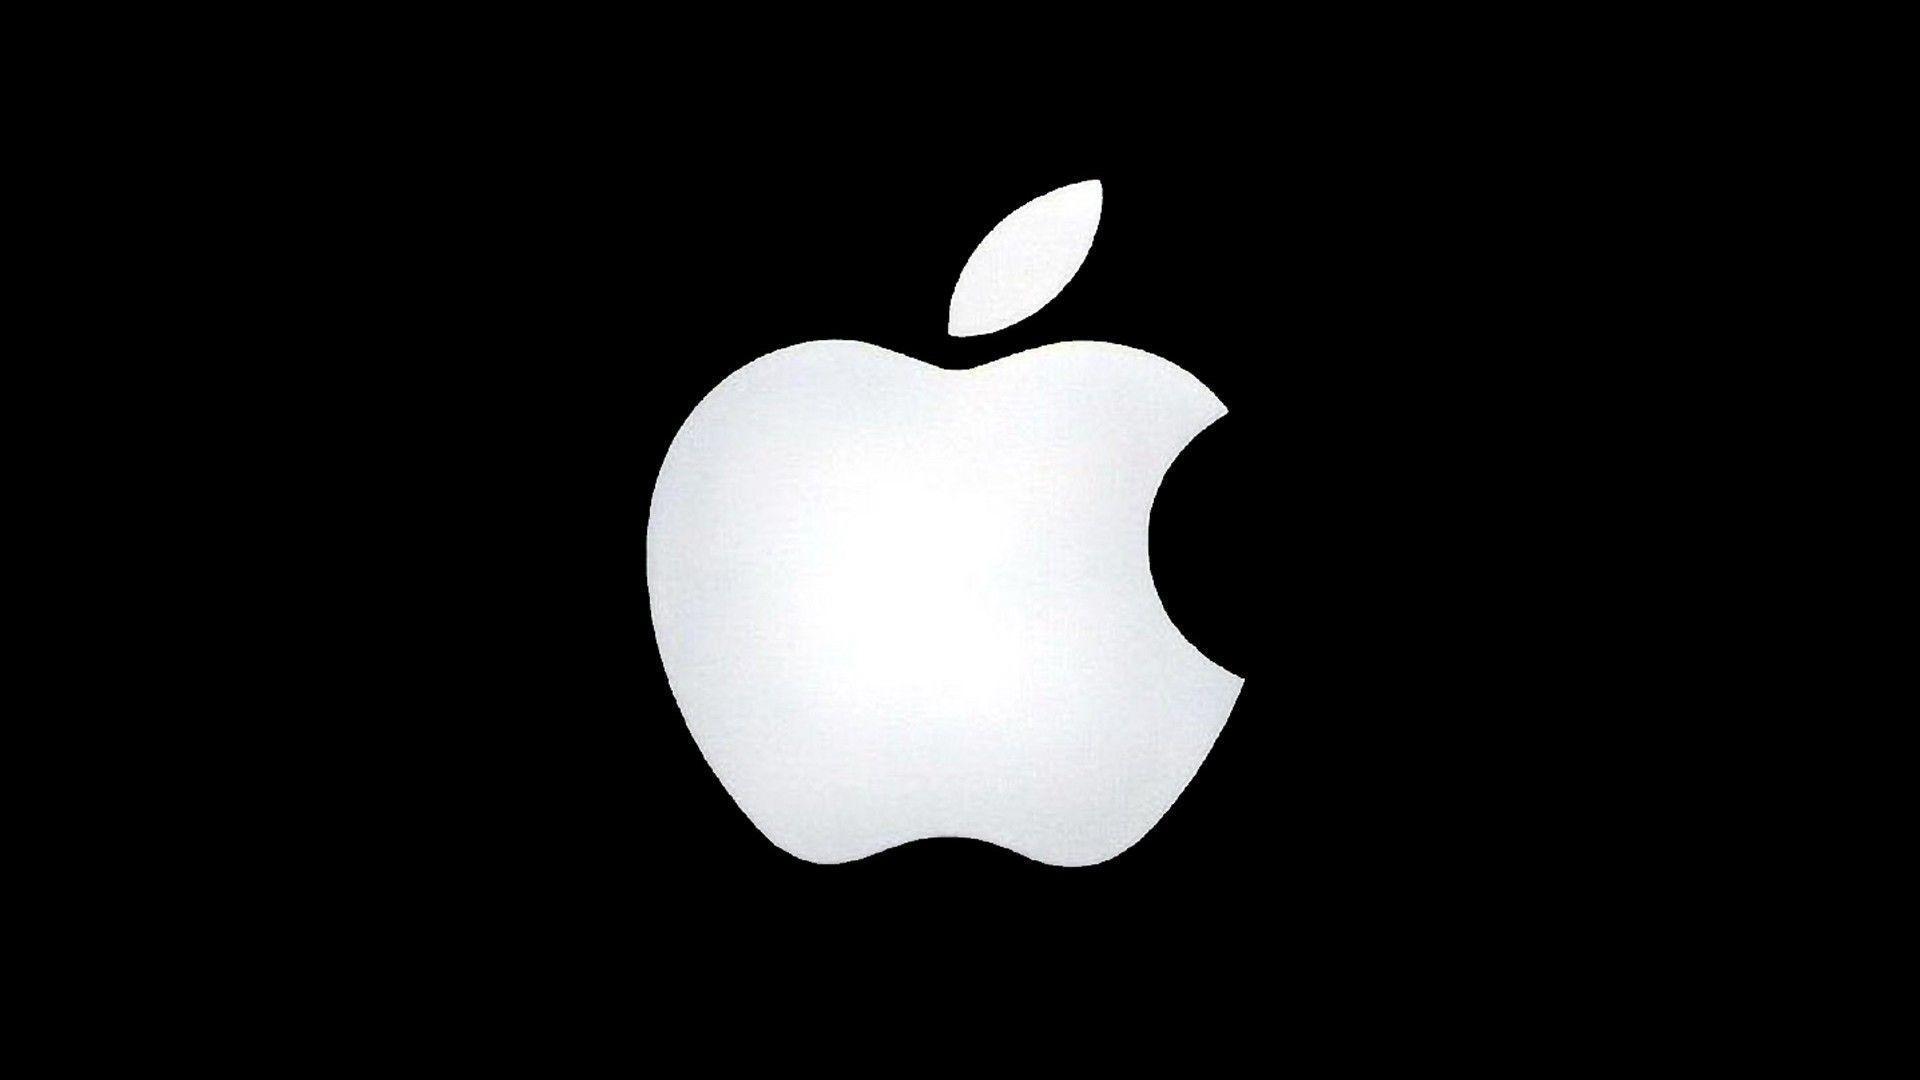 All Black Apple Logo - Black And White Apple Wallpapers - Wallpaper Cave